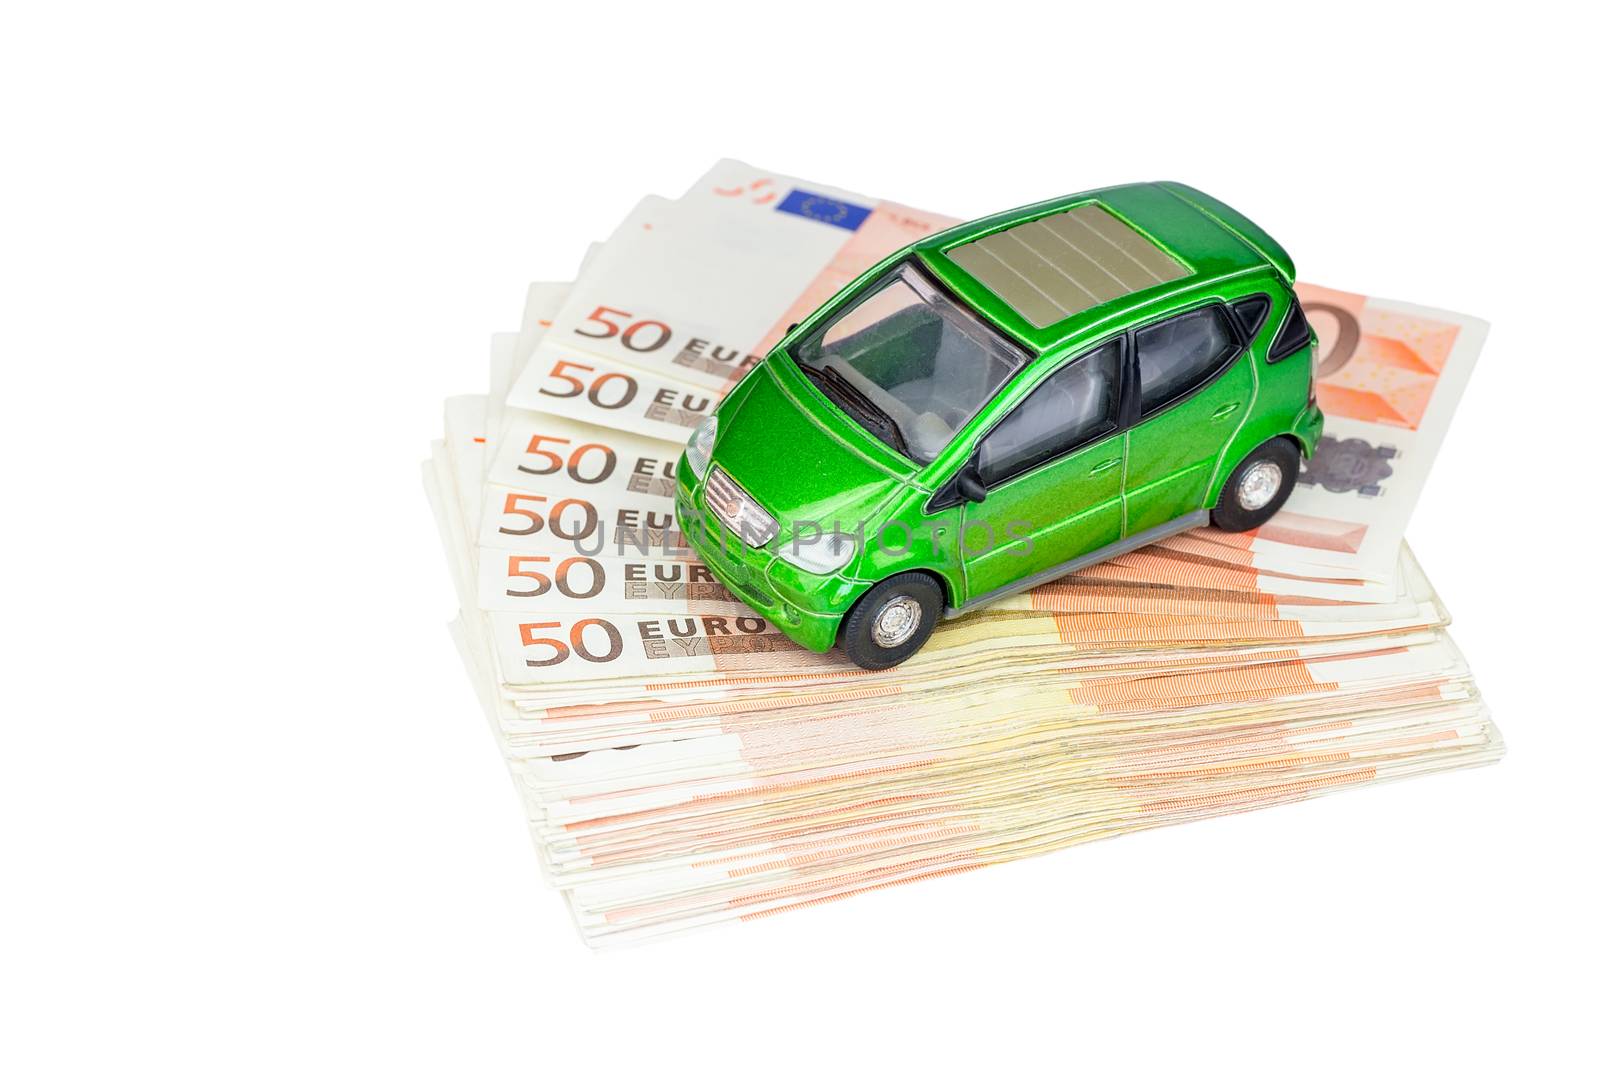 Green model car on stack of euro notes as symbol for buying or costs